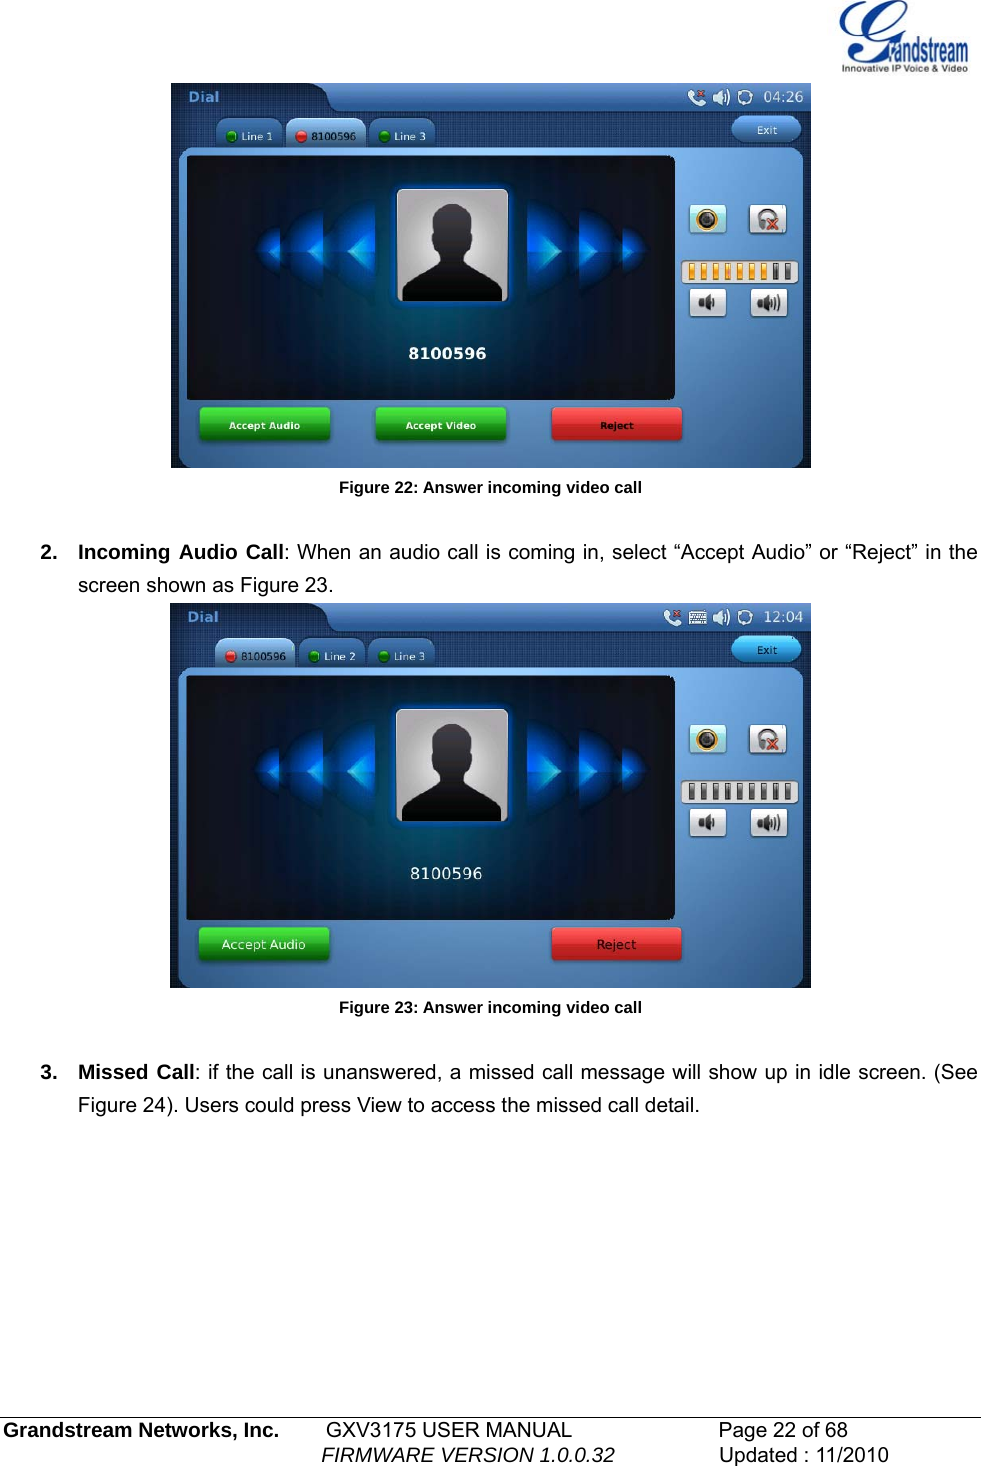    Figure 22: Answer incoming video call  2. Incoming Audio Call: When an audio call is coming in, select “Accept Audio” or “Reject” in the screen shown as Figure 23.   Figure 23: Answer incoming video call  3. Missed Call: if the call is unanswered, a missed call message will show up in idle screen. (See Figure 24). Users could press View to access the missed call detail. Grandstream Networks, Inc.        GXV3175 USER MANUAL                      Page 22 of 68                                                        FIRMWARE VERSION 1.0.0.32                  Updated : 11/2010  